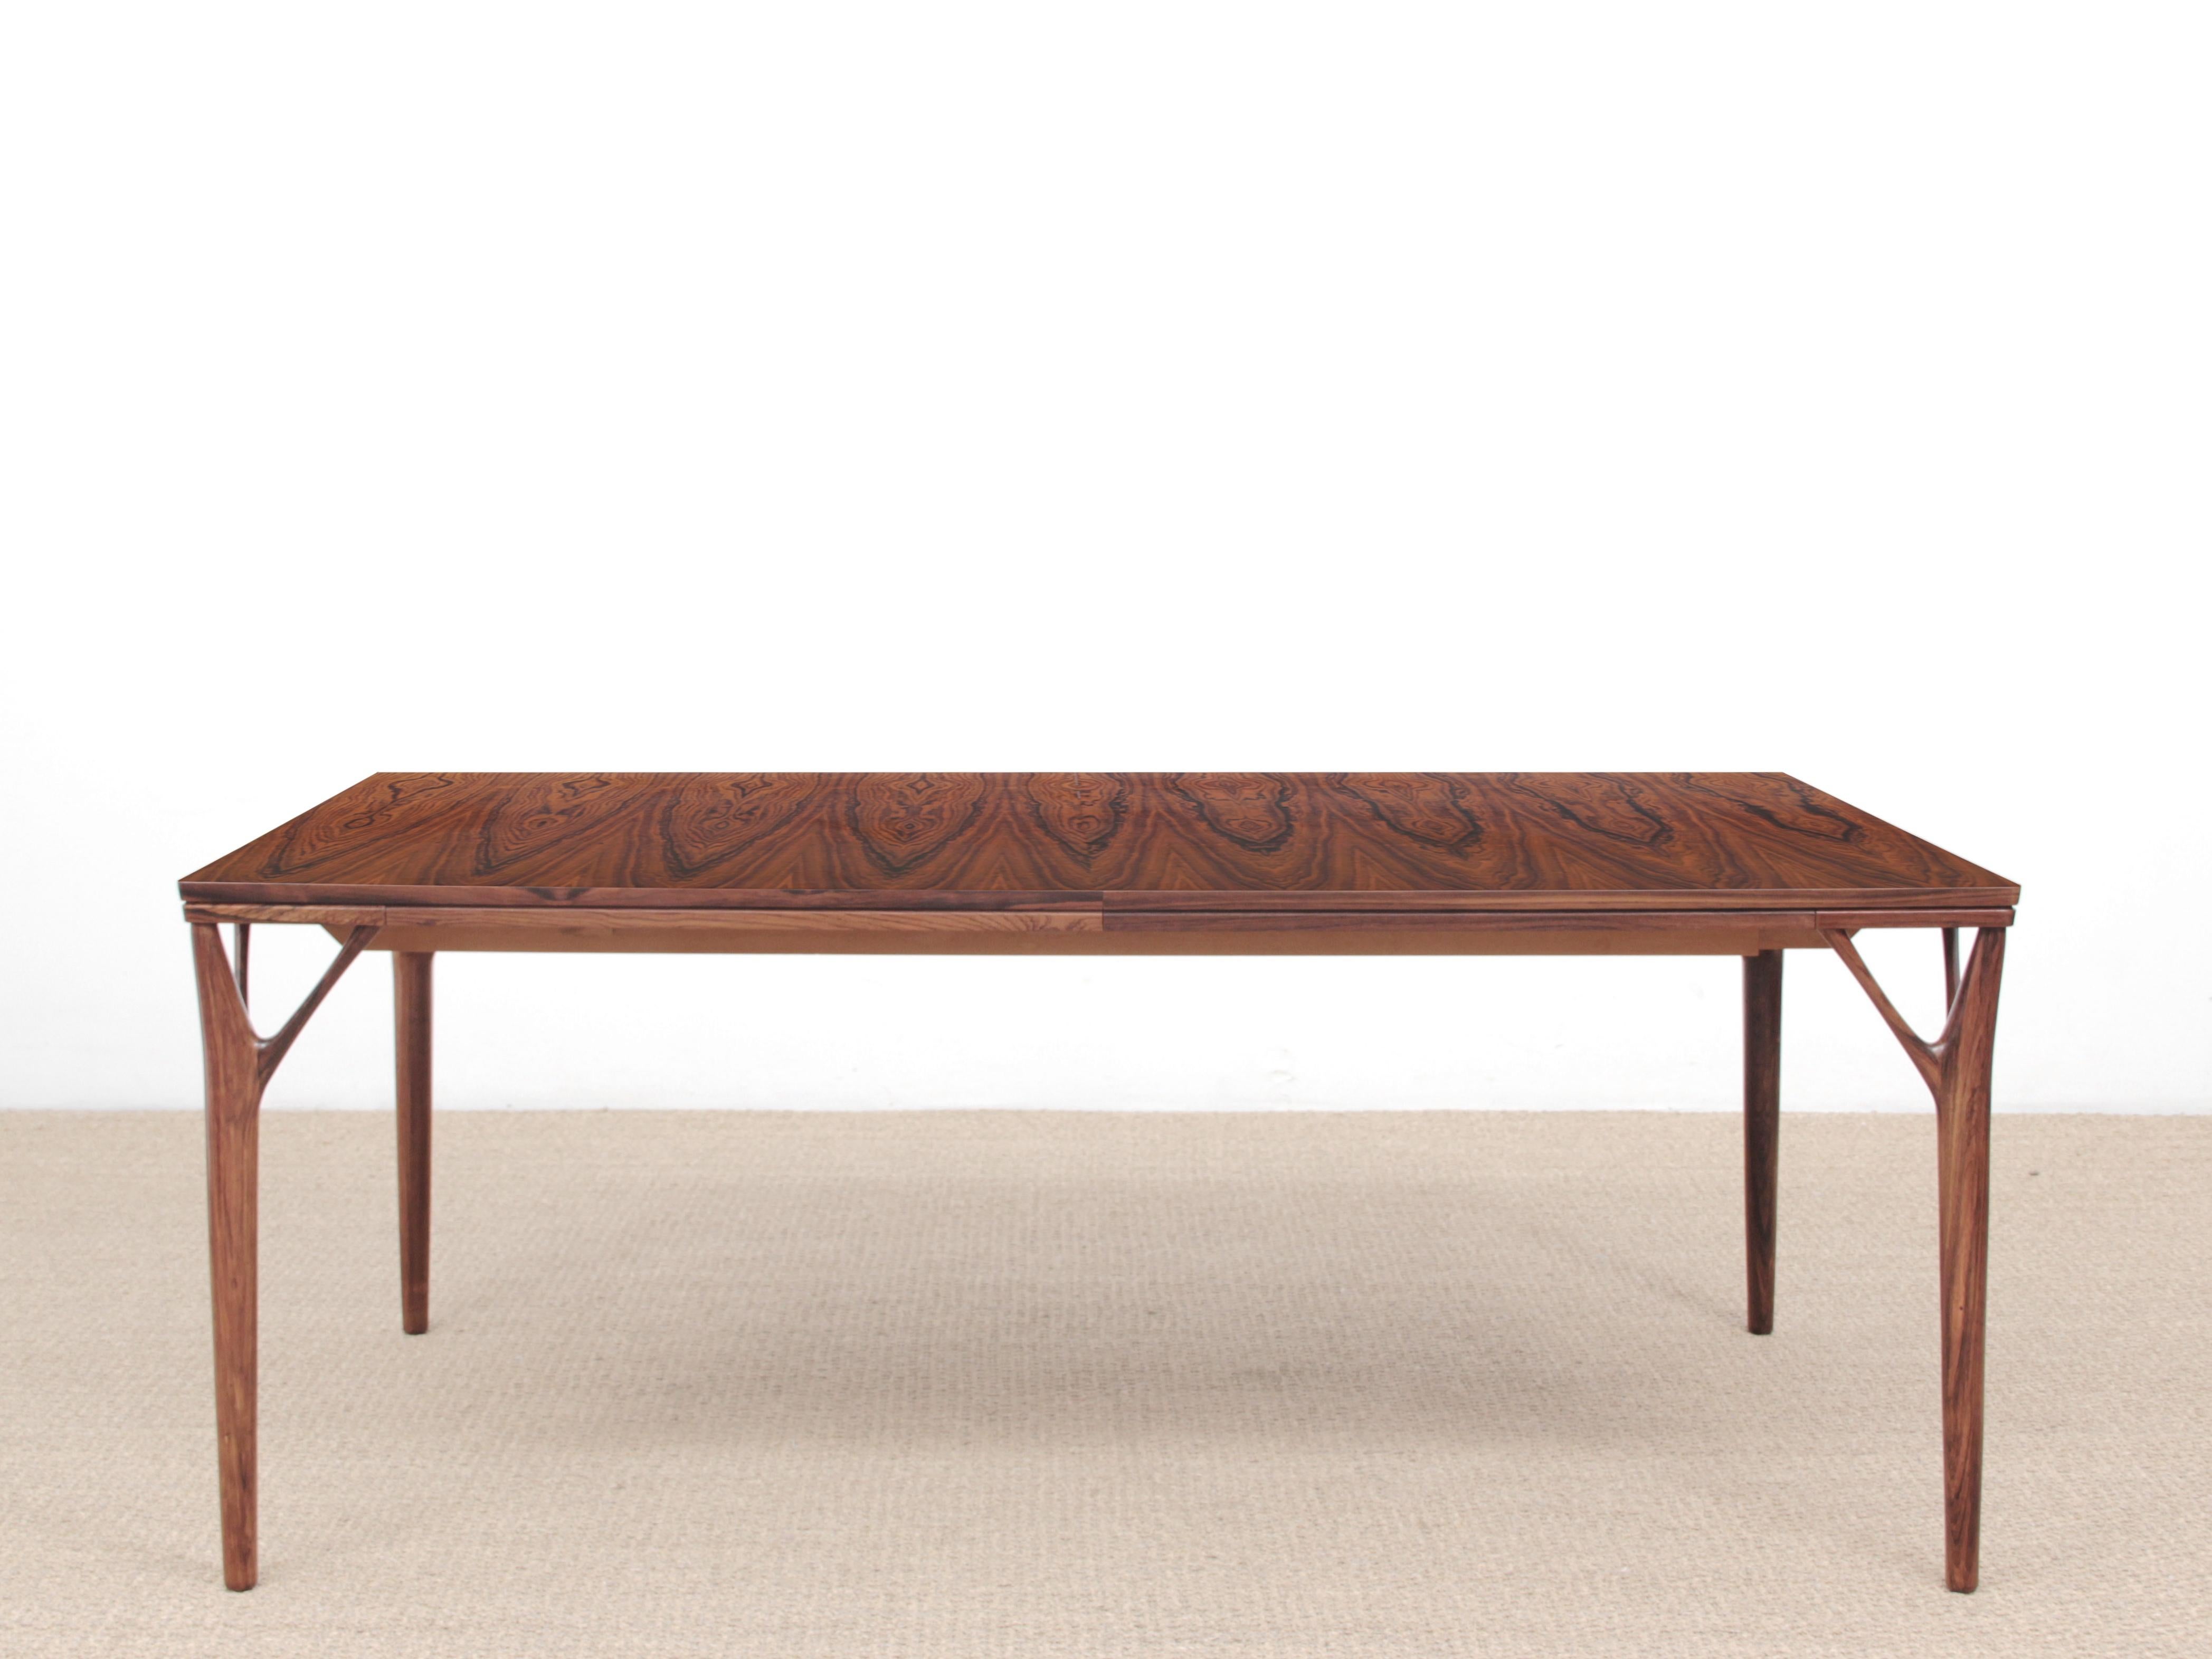 Mid-Century Modern Scandinavian dining table in rosewood designed by Helge Vestergaard Jensen for Søren Horn, in 1970. 8-12 seats, up-and-over extension flap, hidden underneath the tabletop.